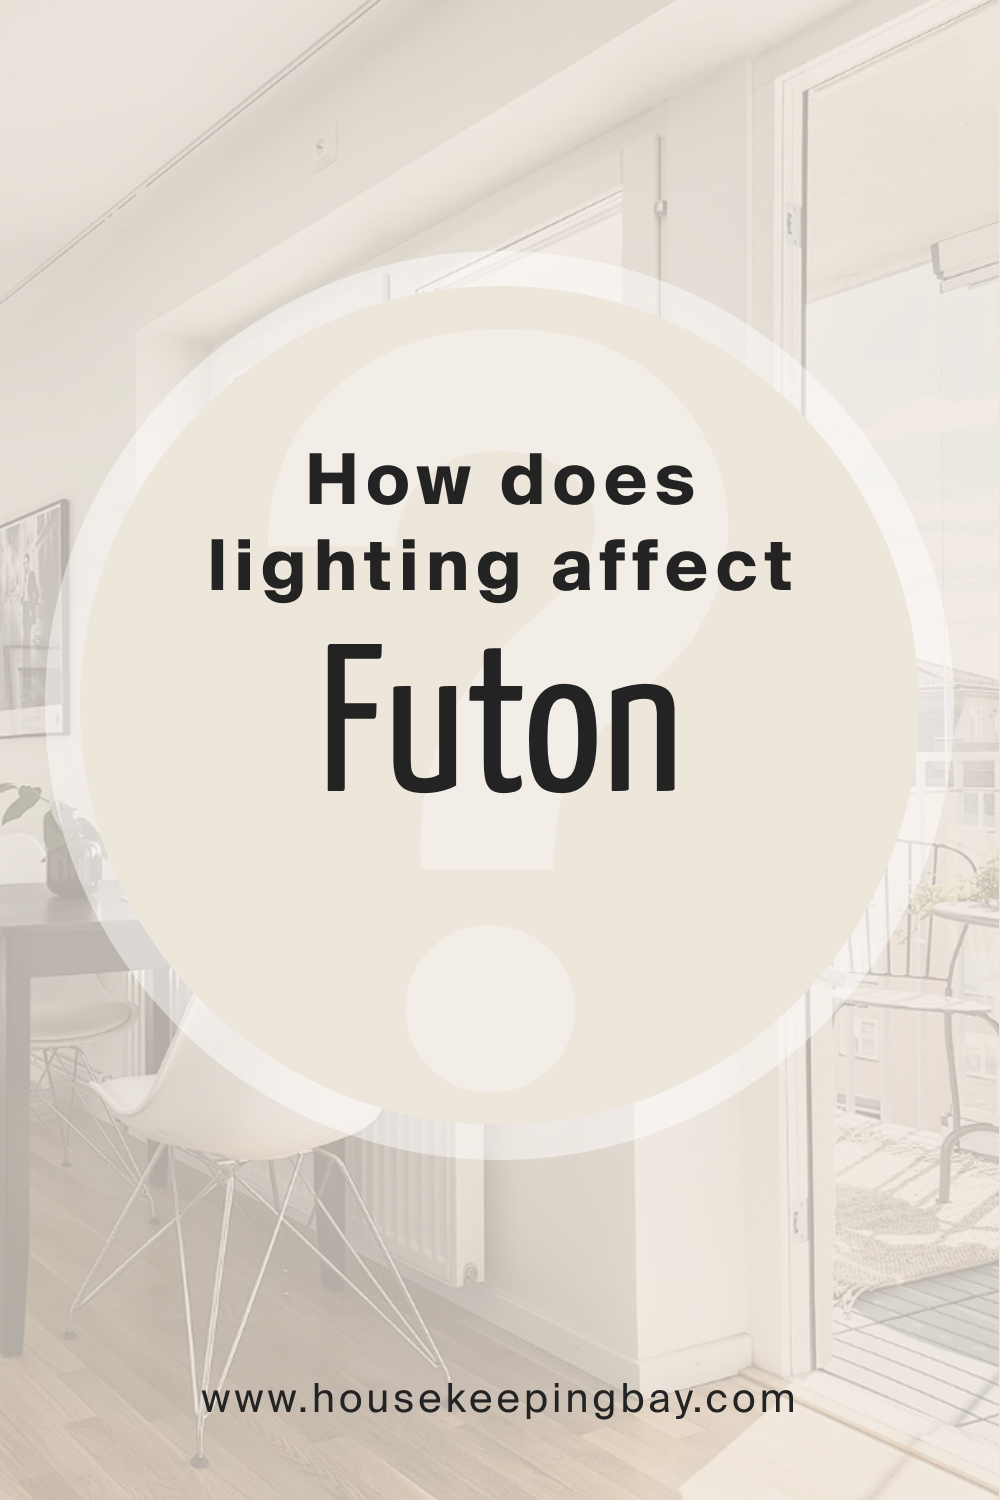 How does lighting affect SW 7101 Futon